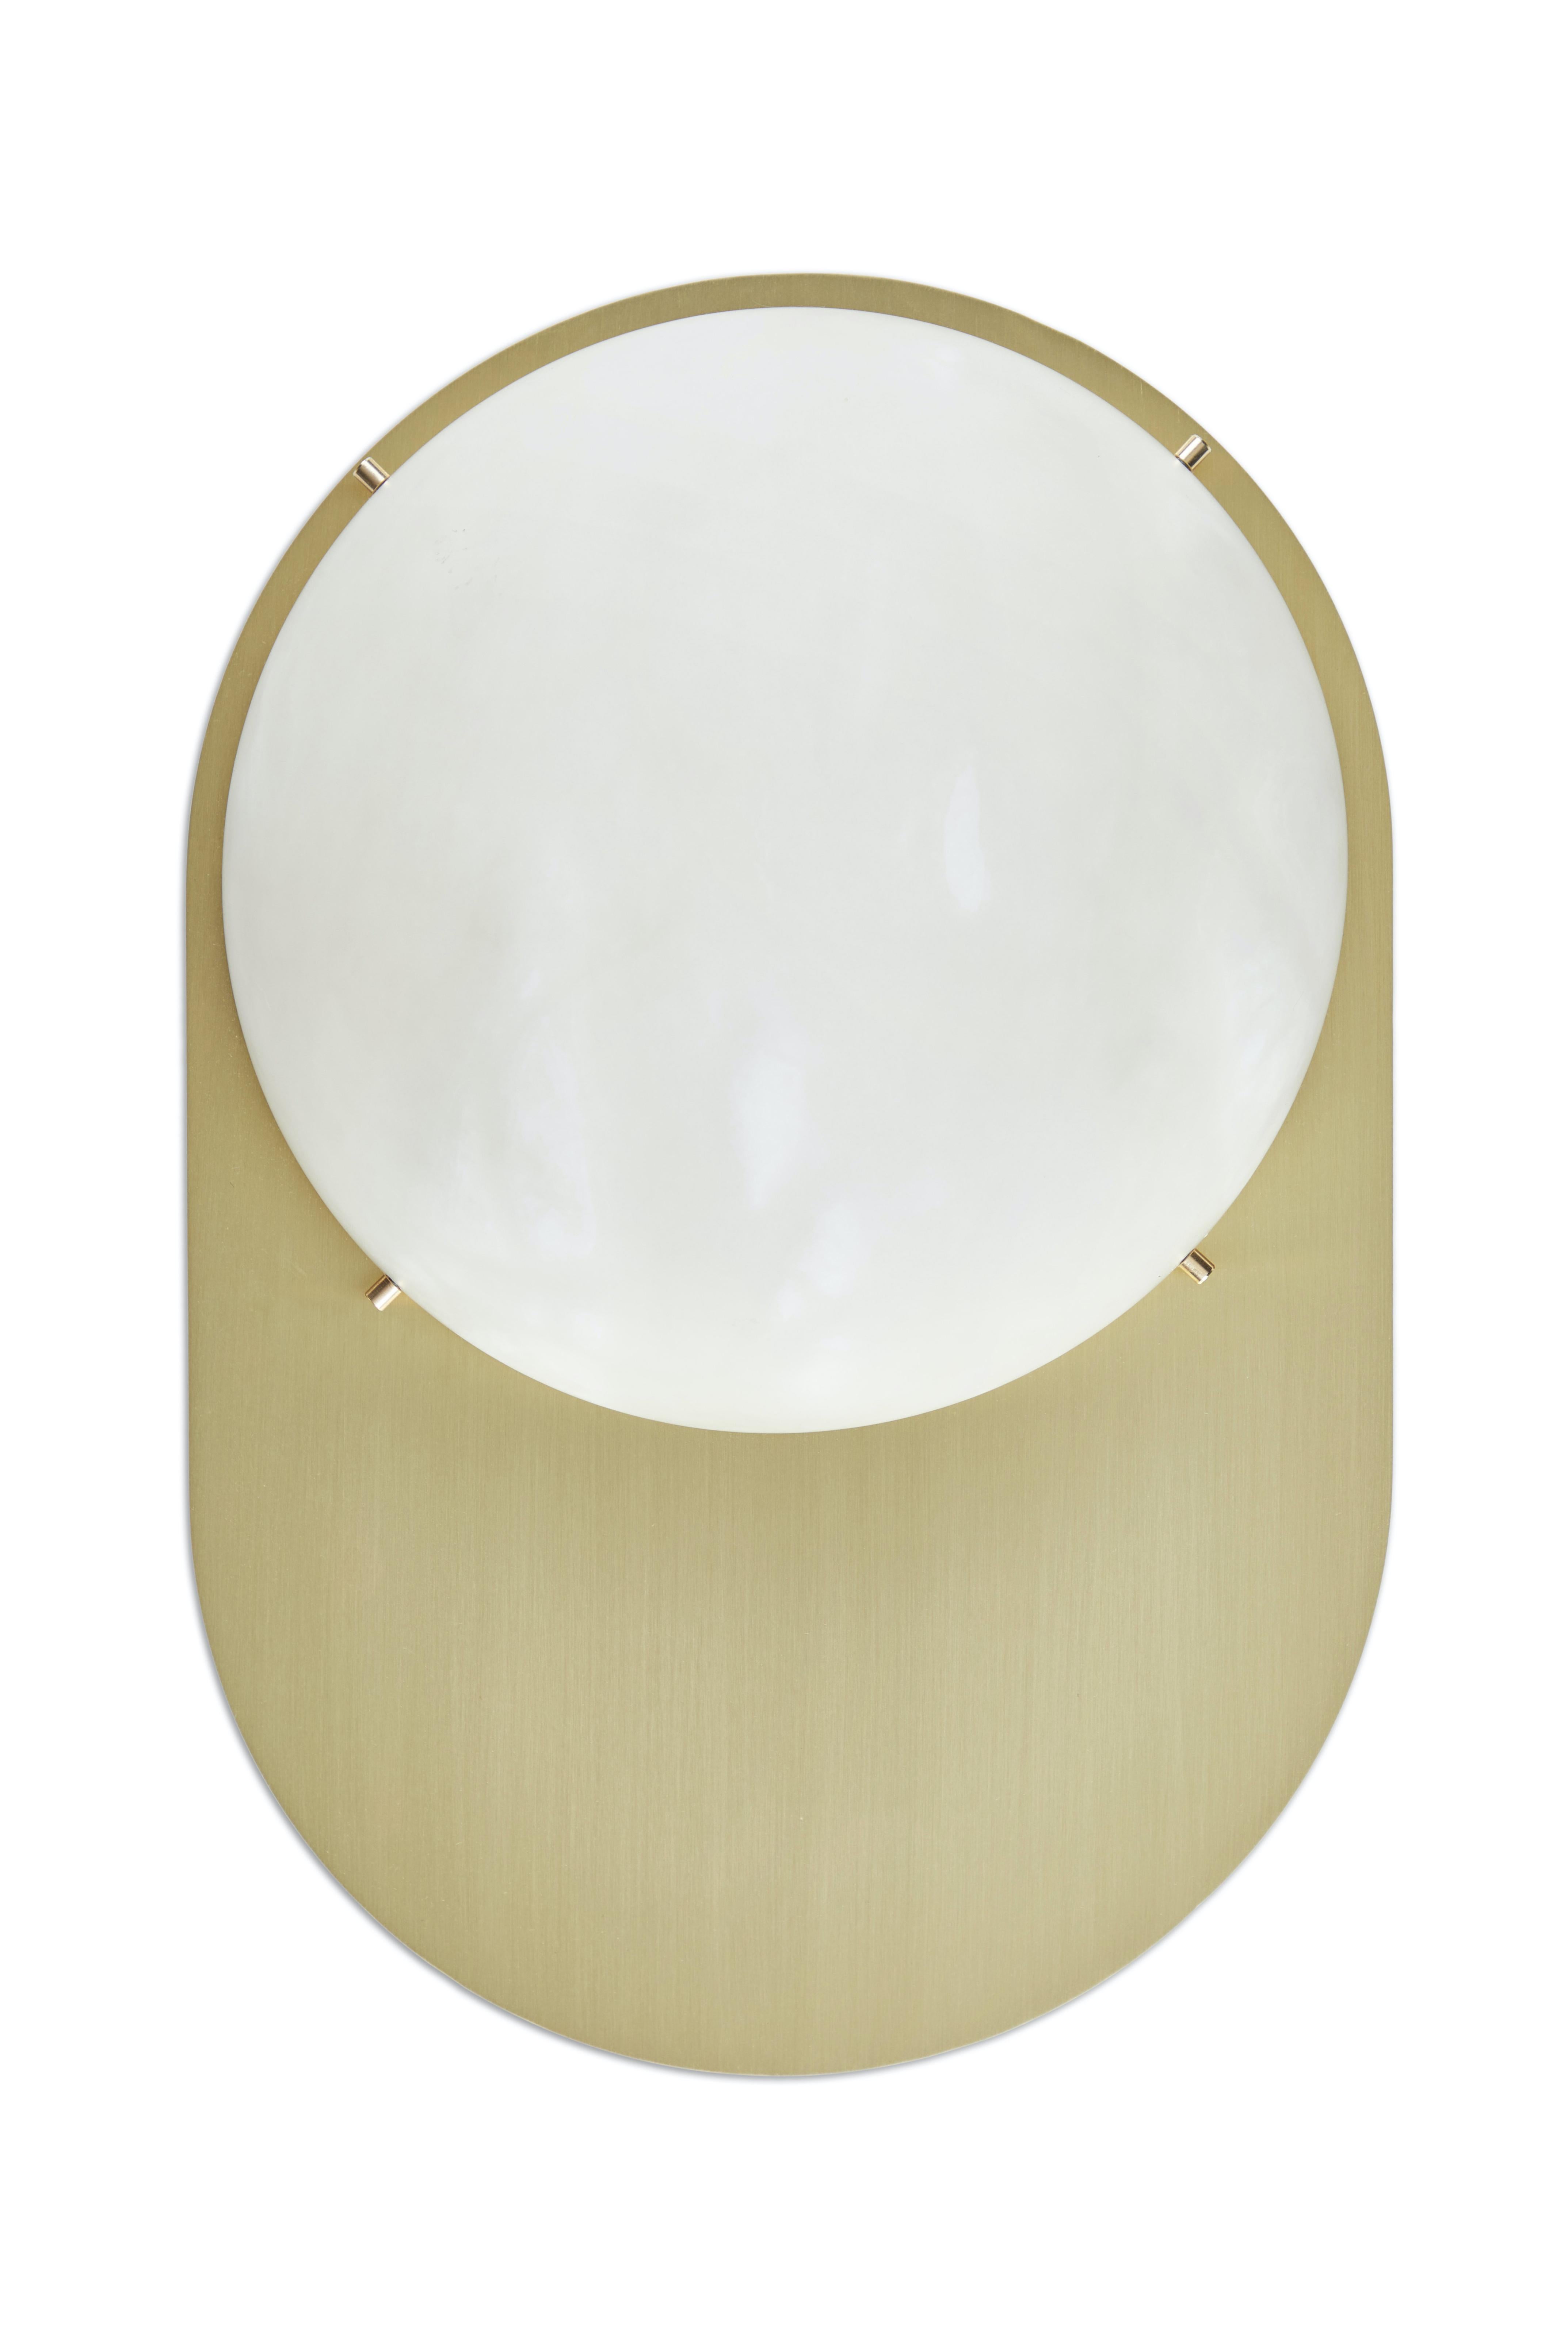 Large 'Toogle' sconce in brass and alabaster. Handcrafted in Los Angeles in the workshop of noted French designer and antiques dealer Denis de le Mesiere, who fabricates his highly refined original designs with scrupulous attention to detail and